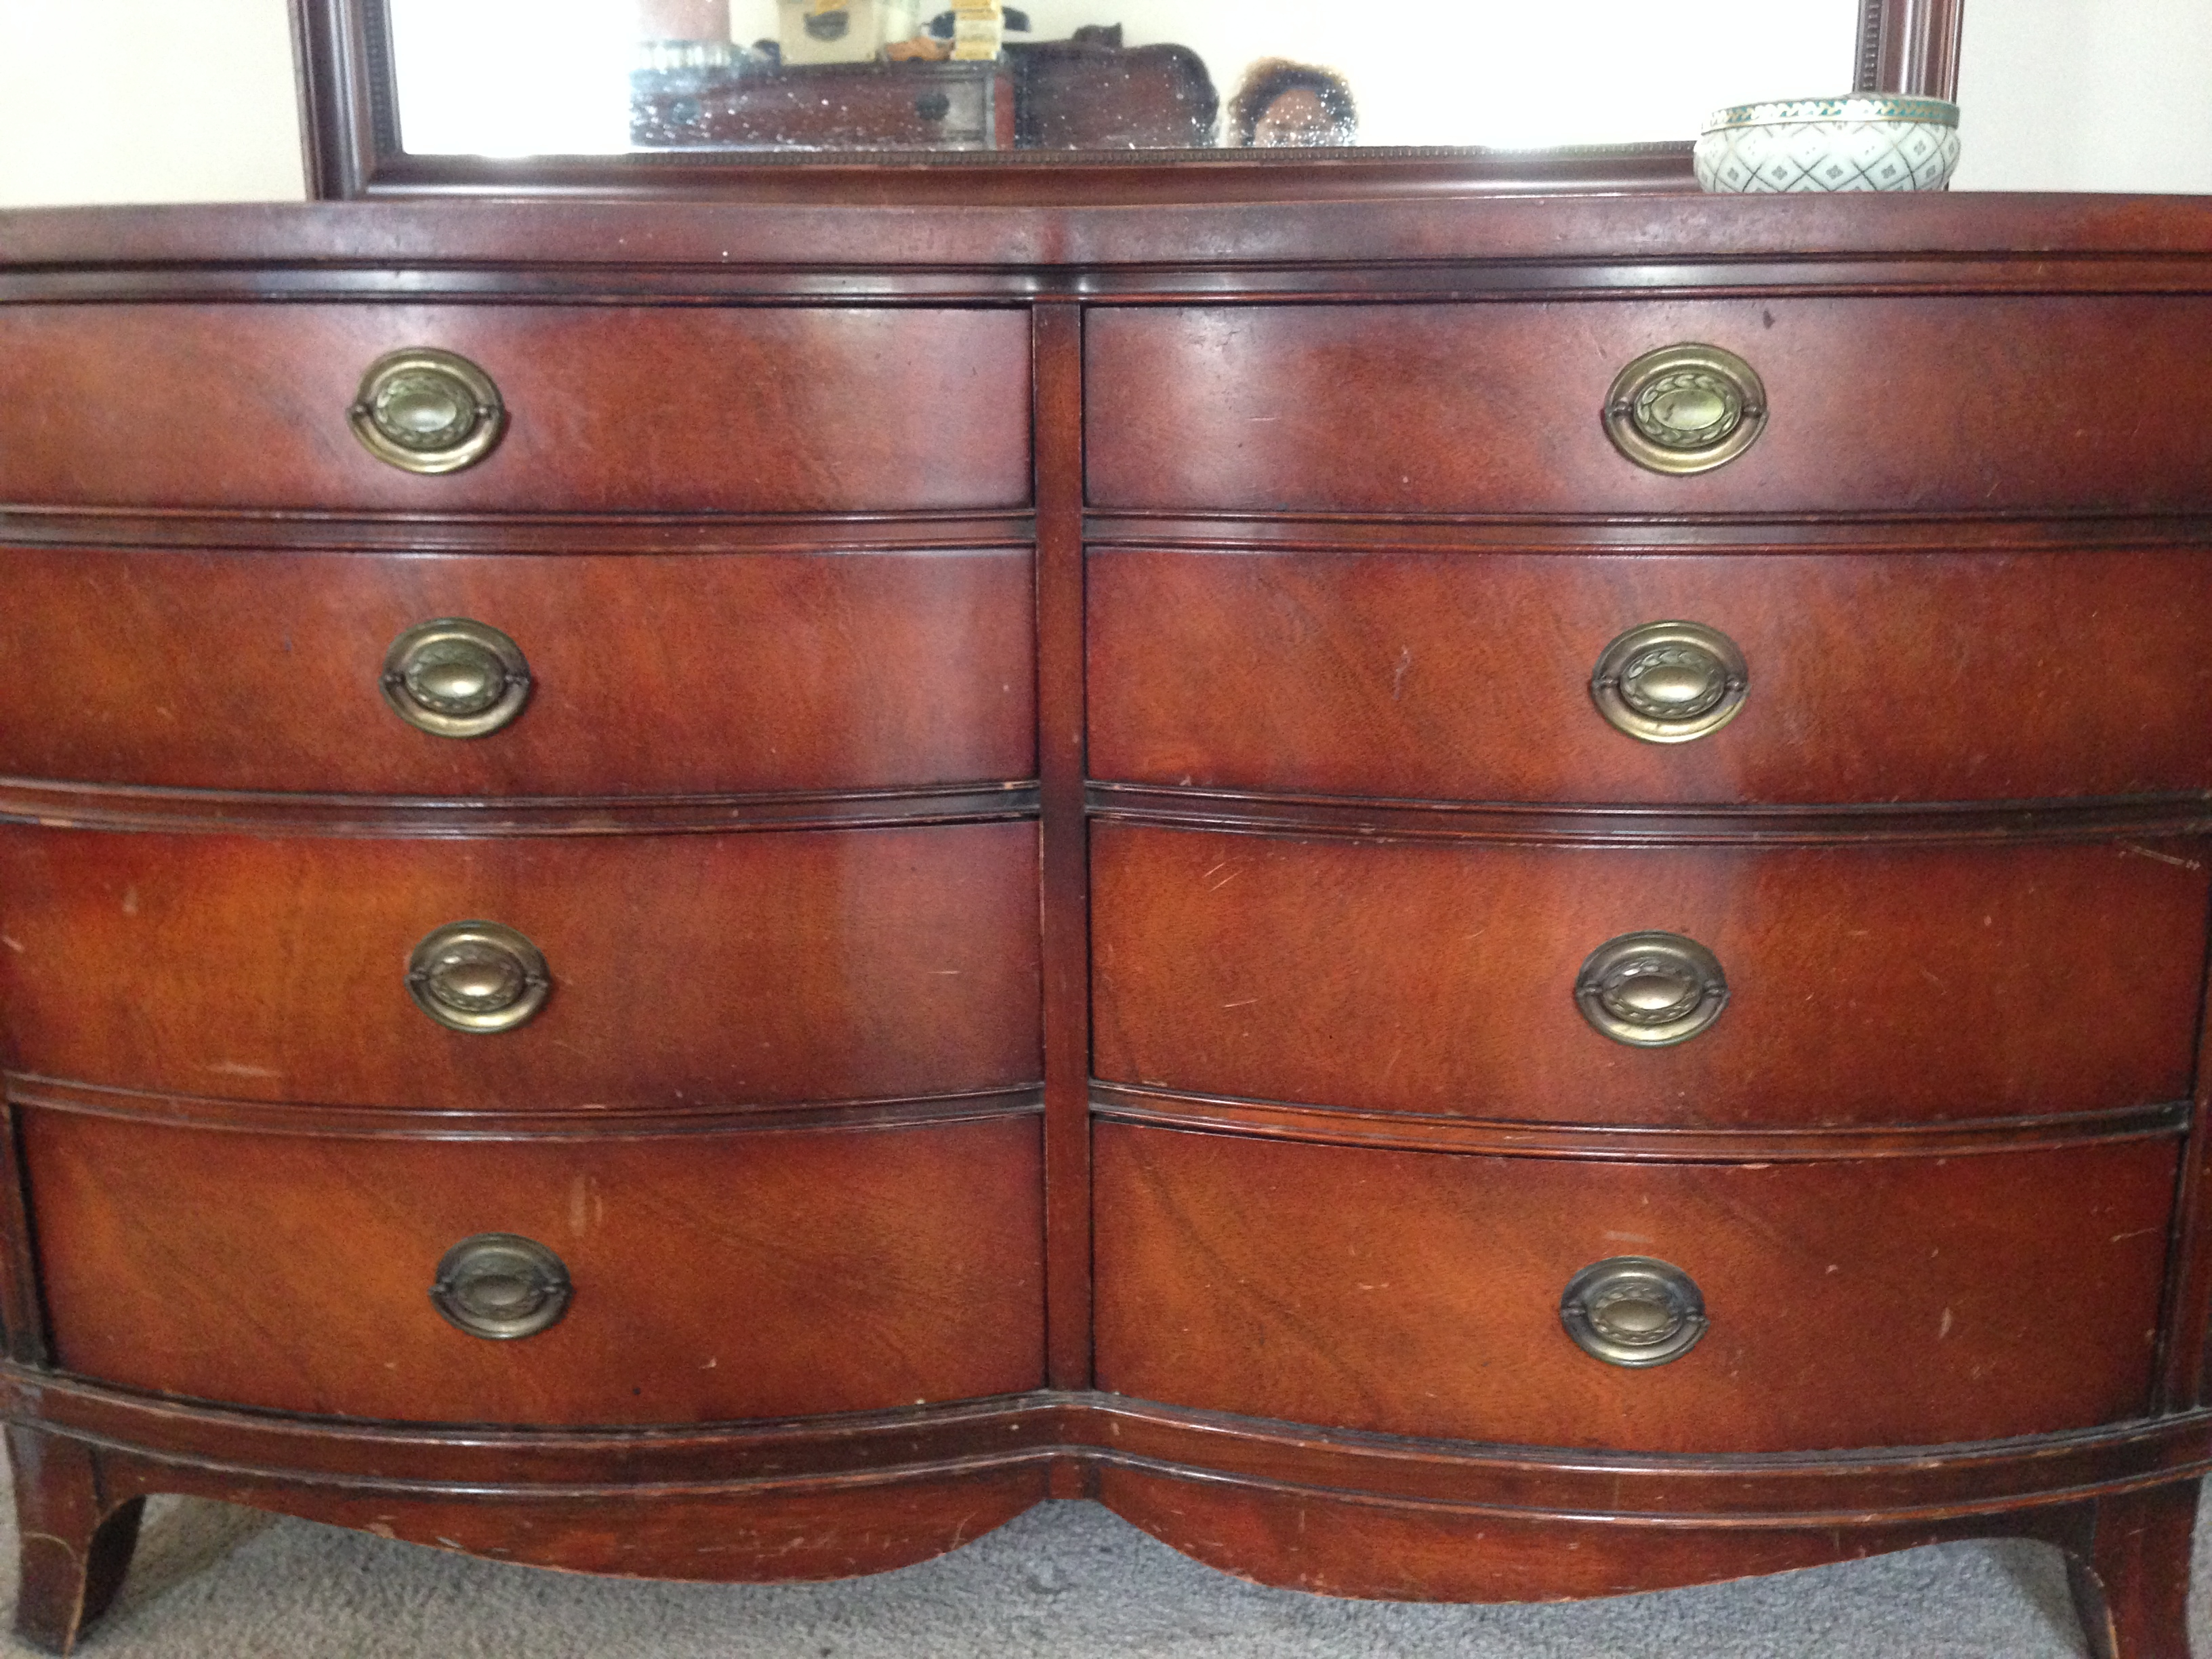 Mahogany Bedroom Furniture Antique Appraisal Instappraisal pertaining to sizing 3264 X 2448